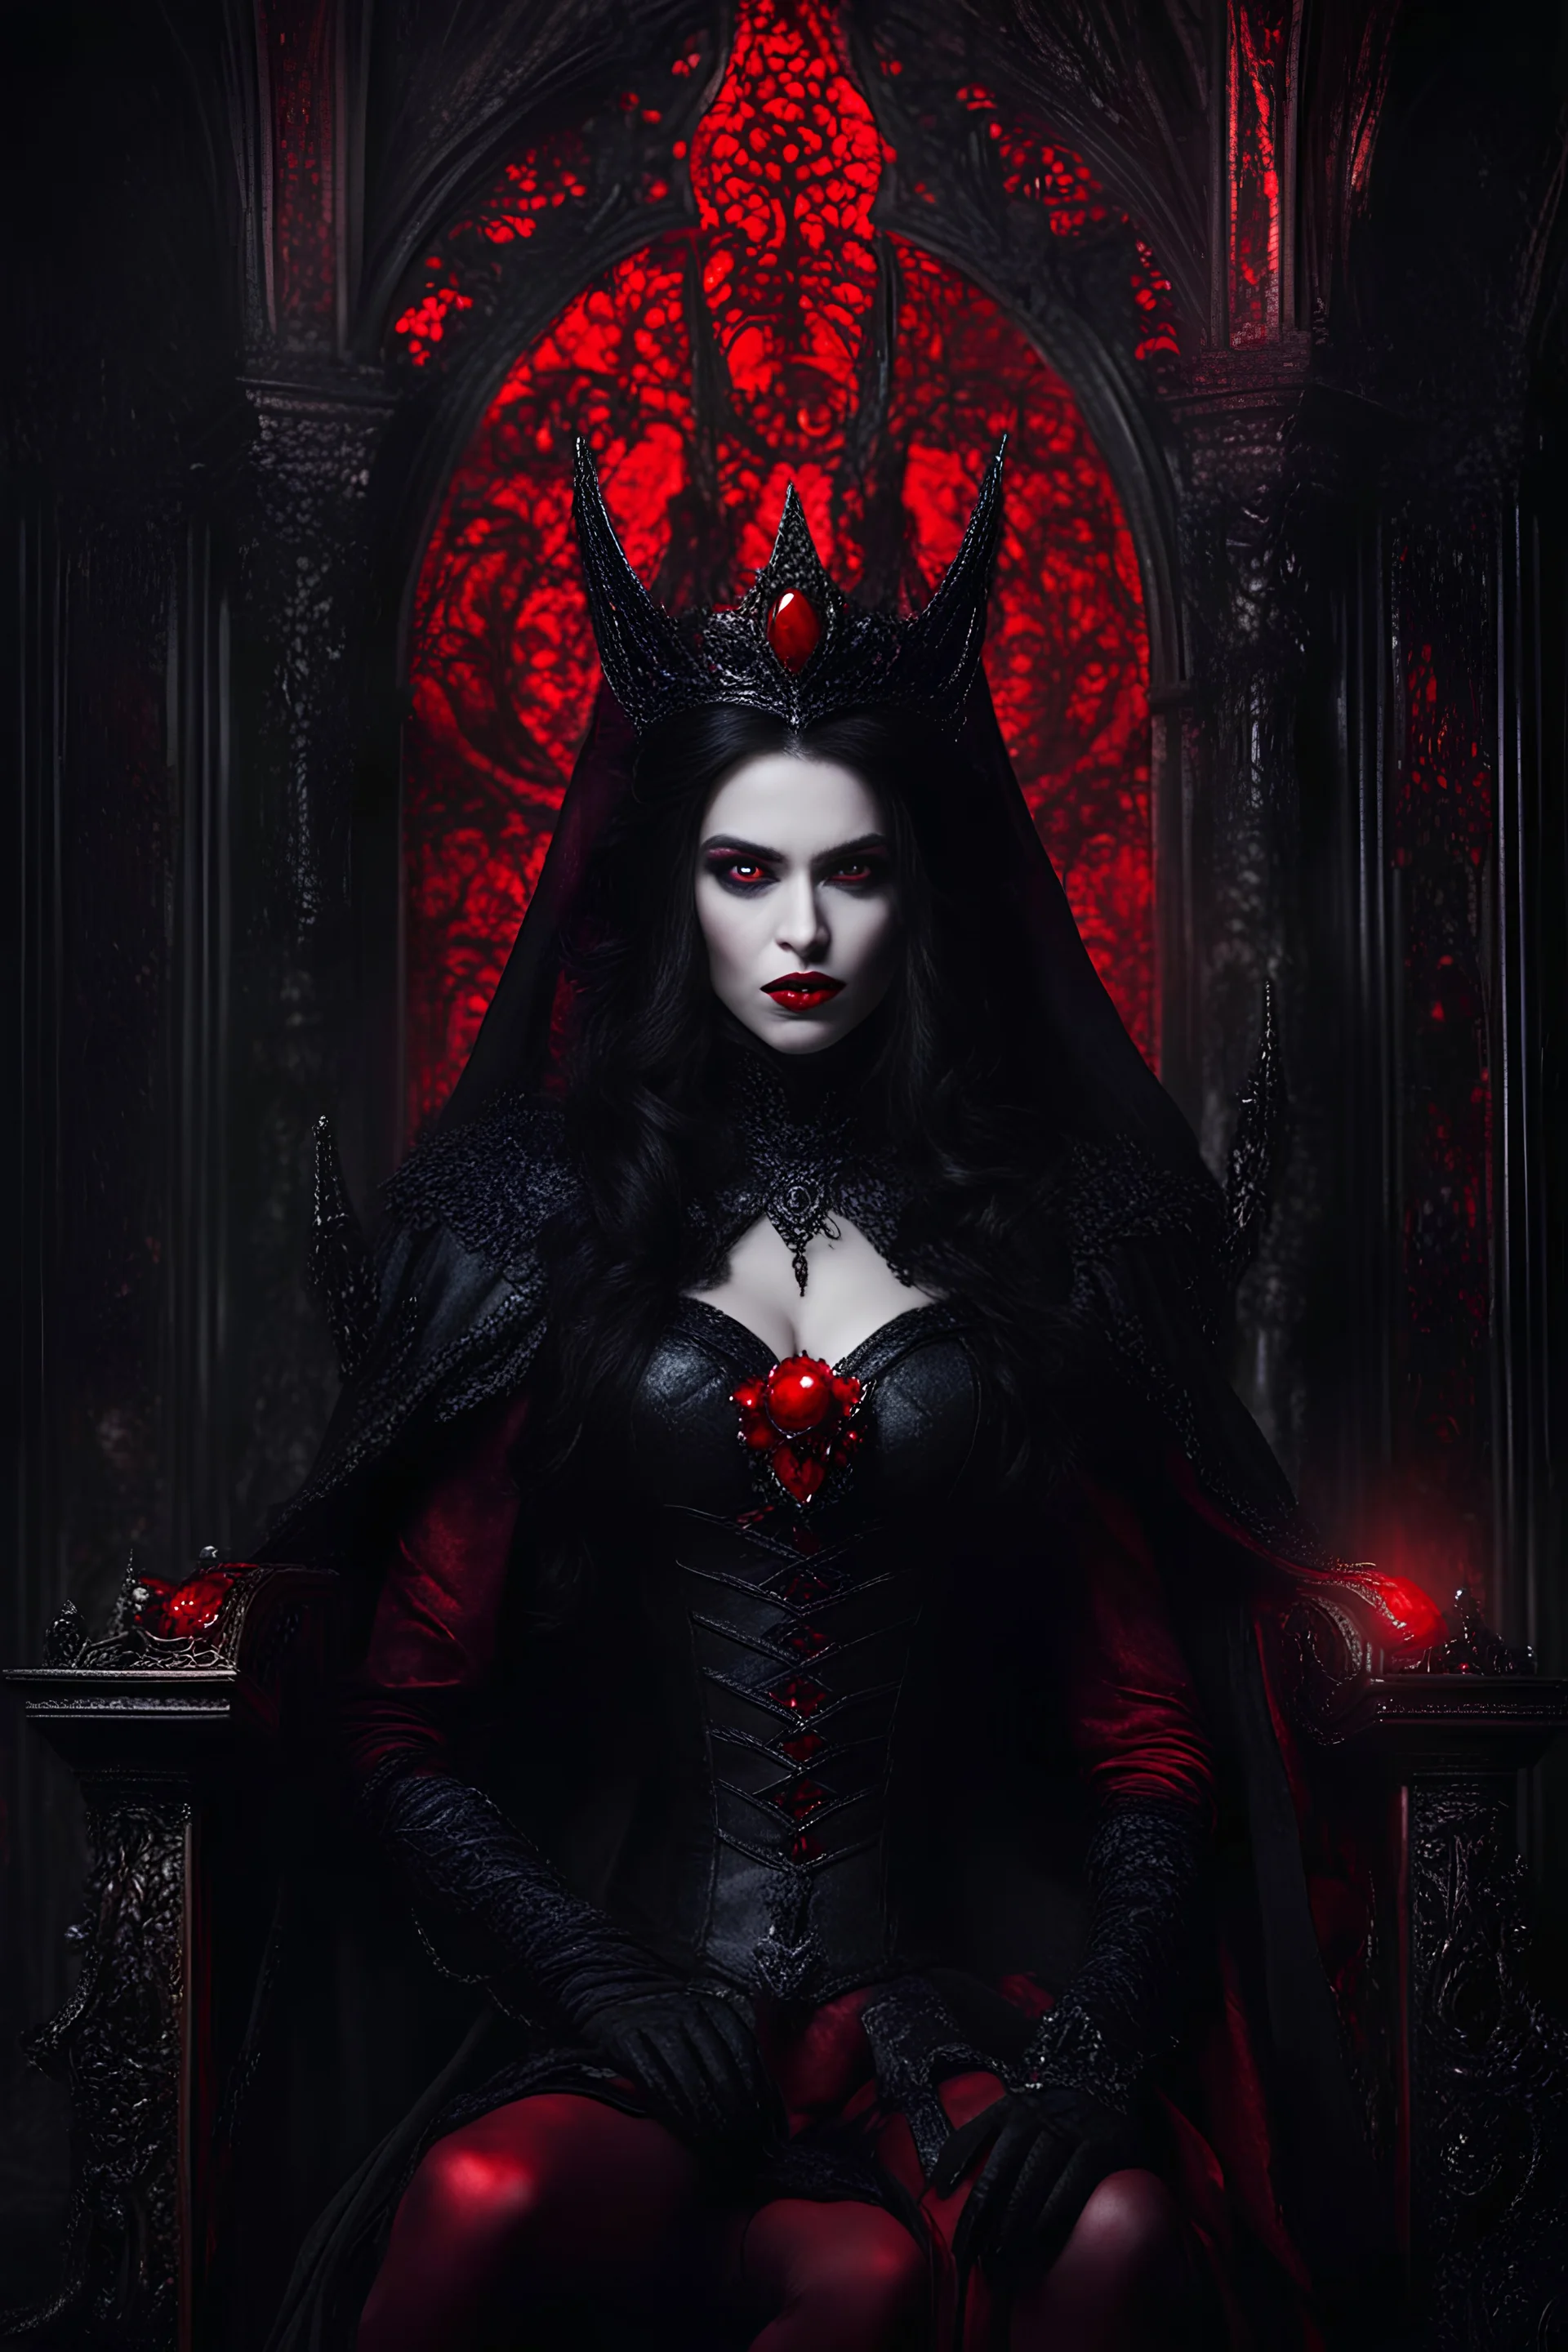 Photography Horror Art of The majestic Dark Vampire Queen,red eyes bright,sits on his throne, in darkness palace background , close-up portrait